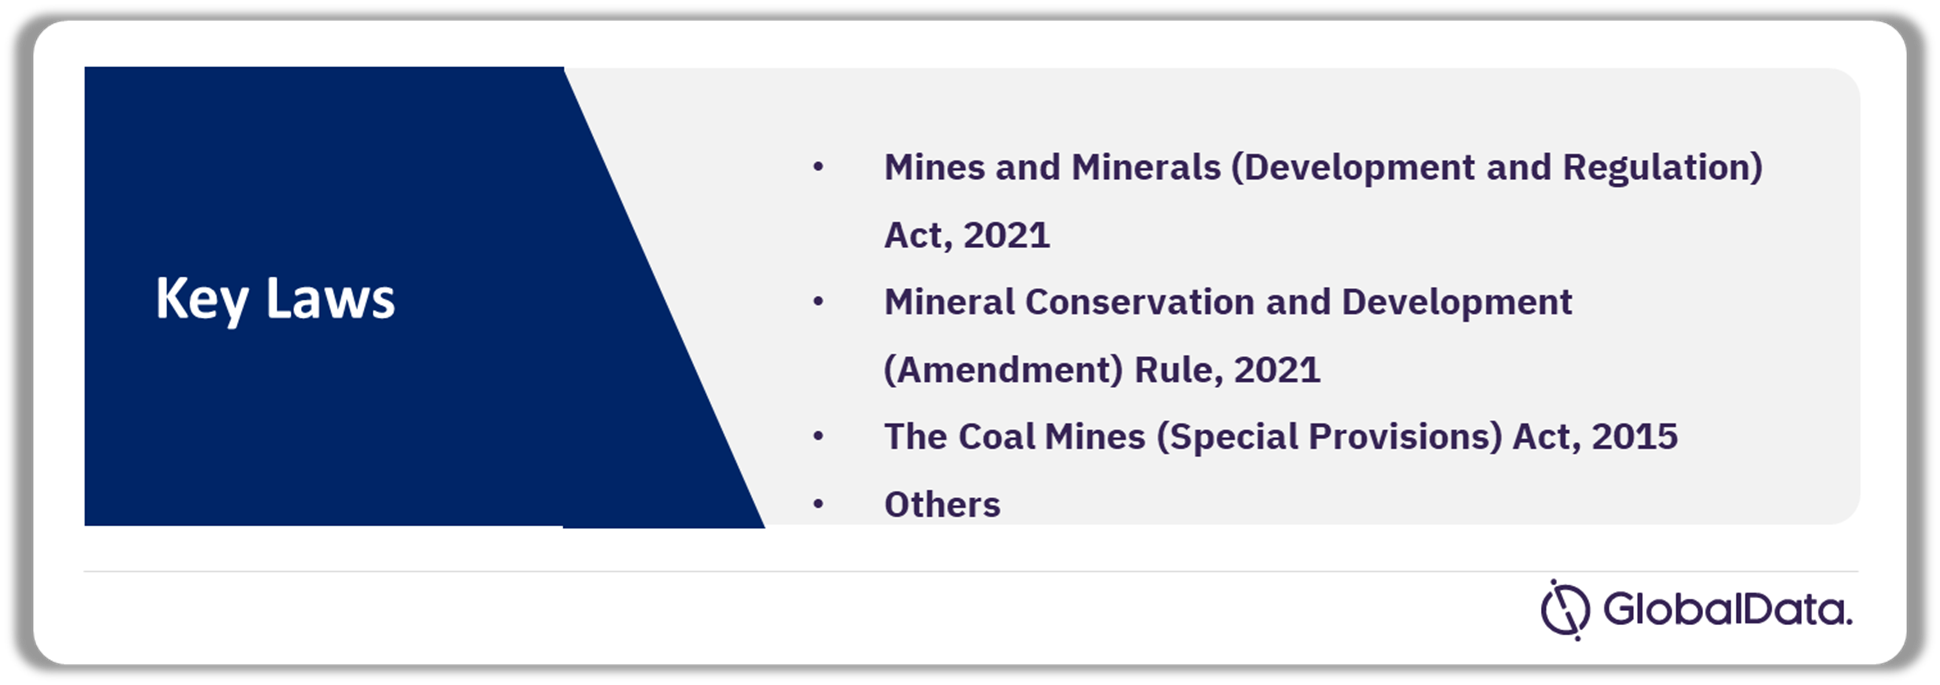 Mining Laws in India Mining Industry